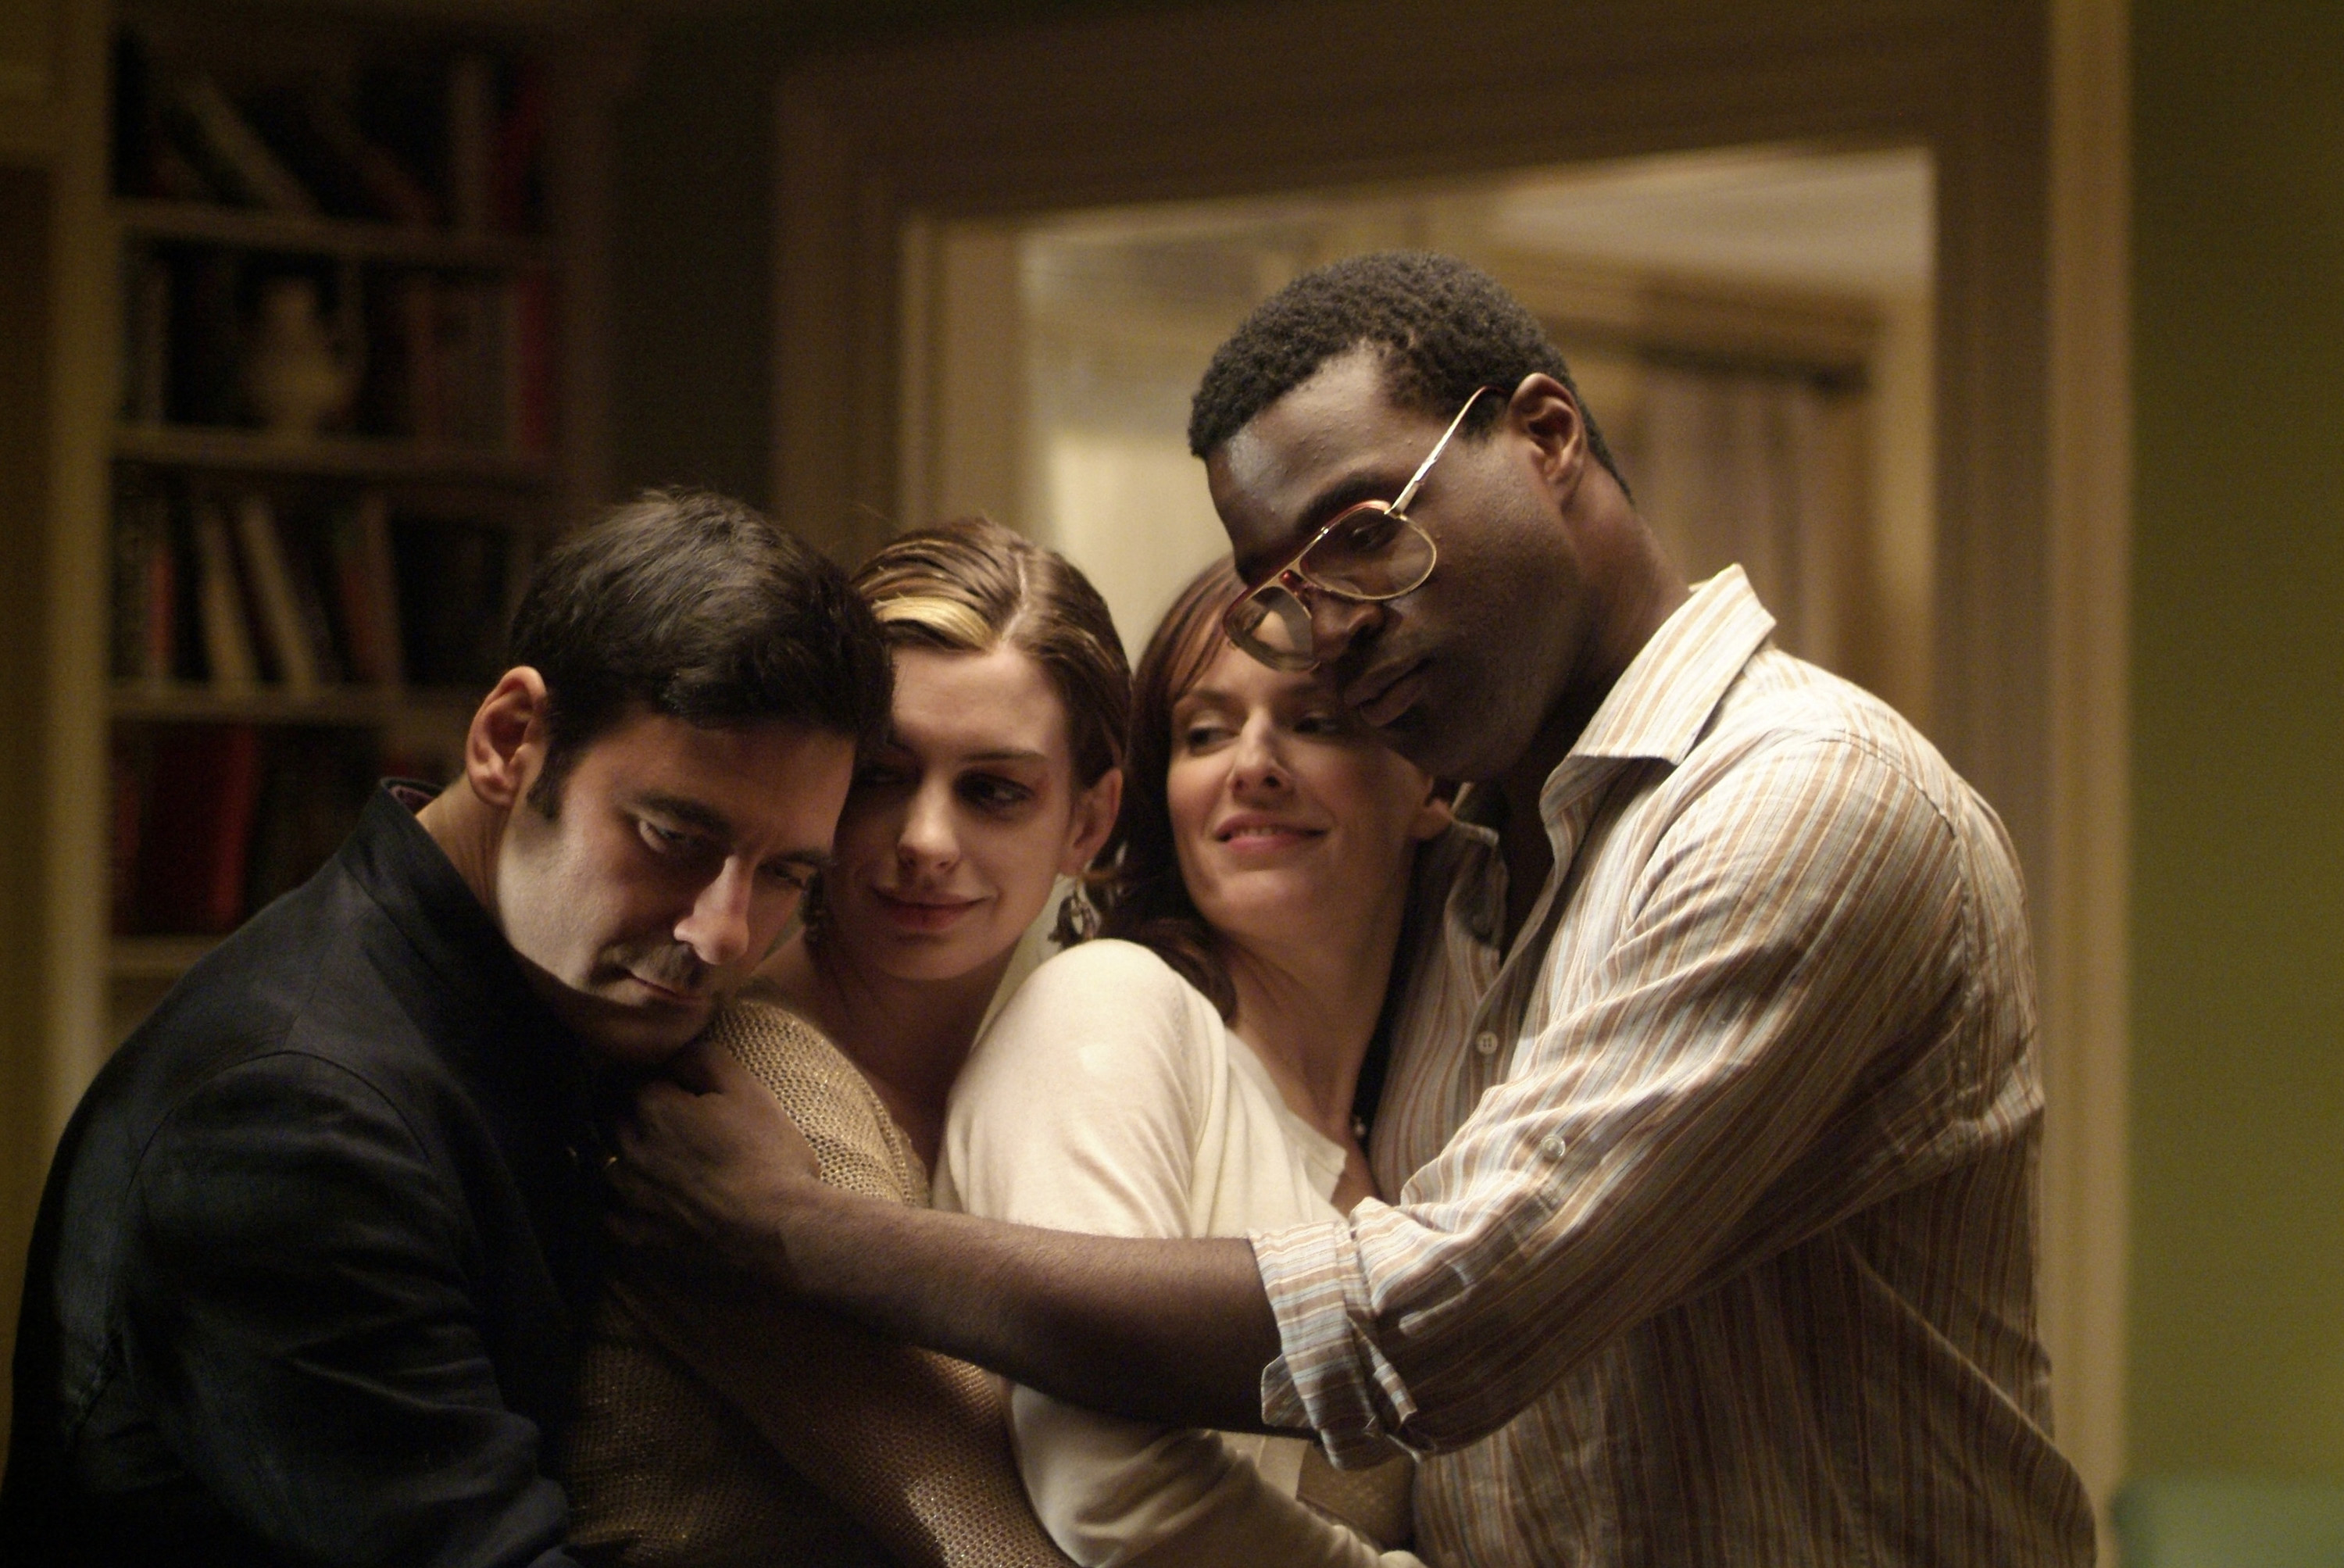 Mather Zickel, Anne Hathaway, Rosemarie DeWitt, and Tunde Adebimpe embrace